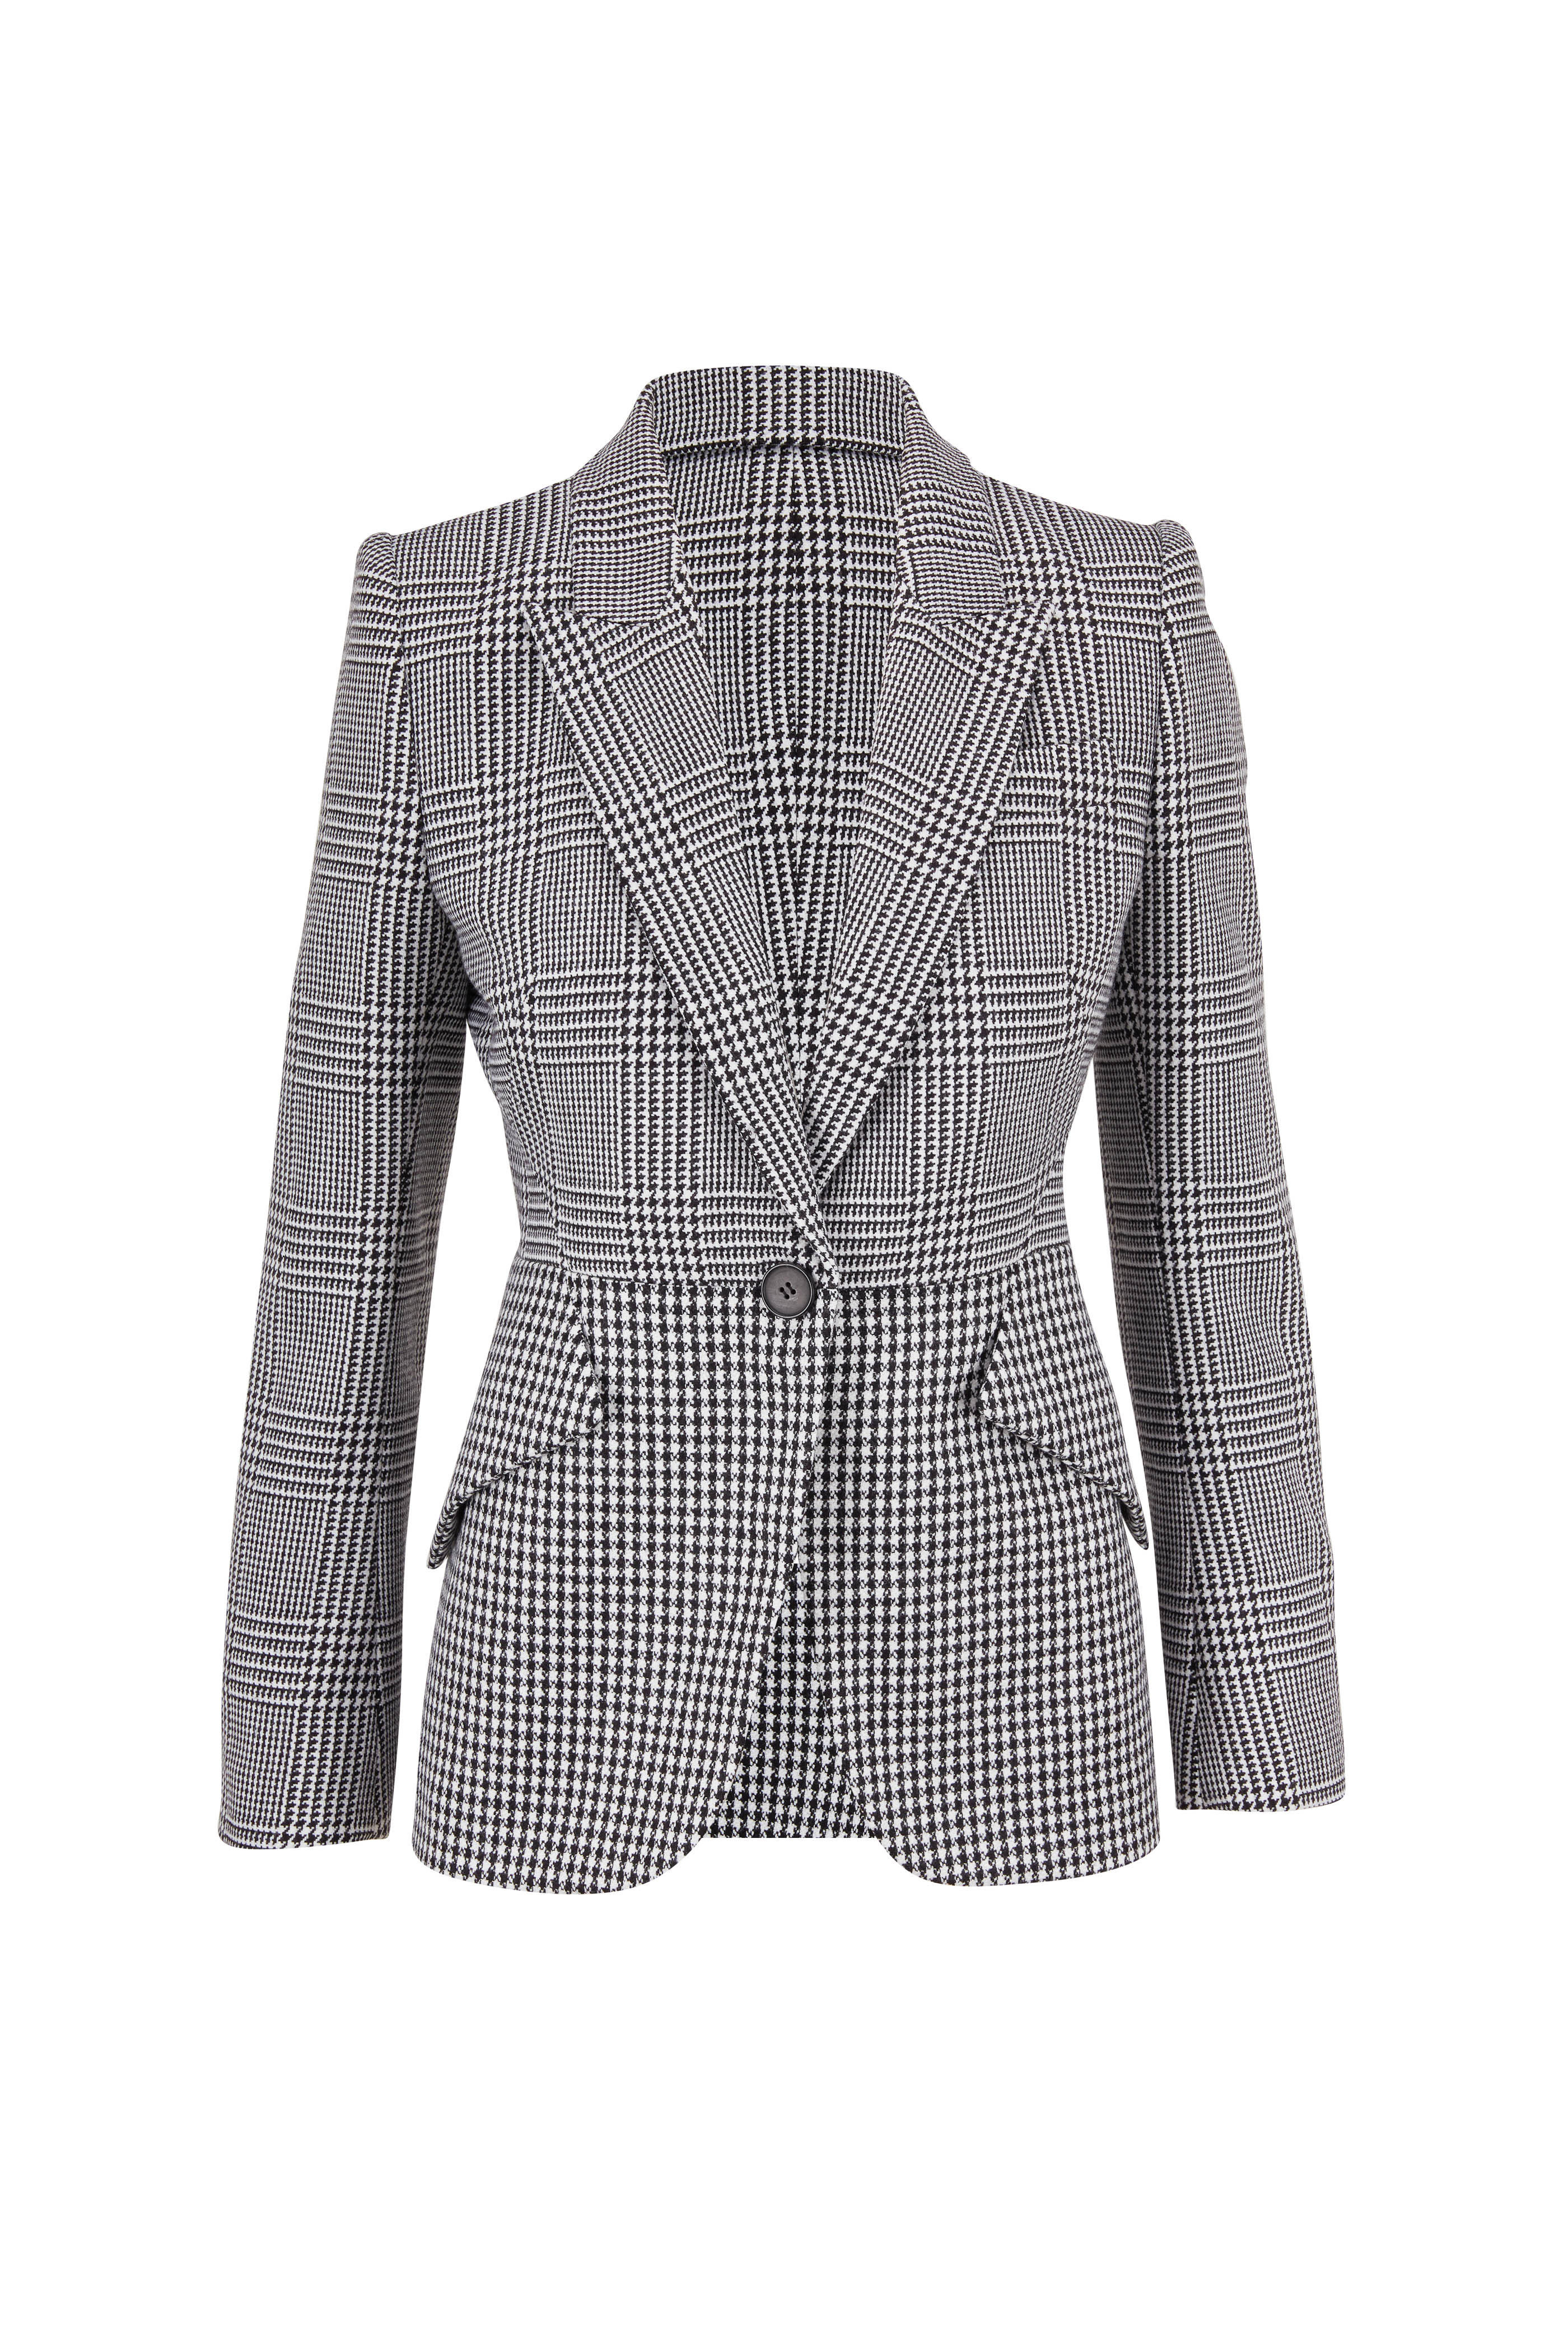 Alexander McQueen - Black & White Prince Of Wales & Houndstooth Jacket ...